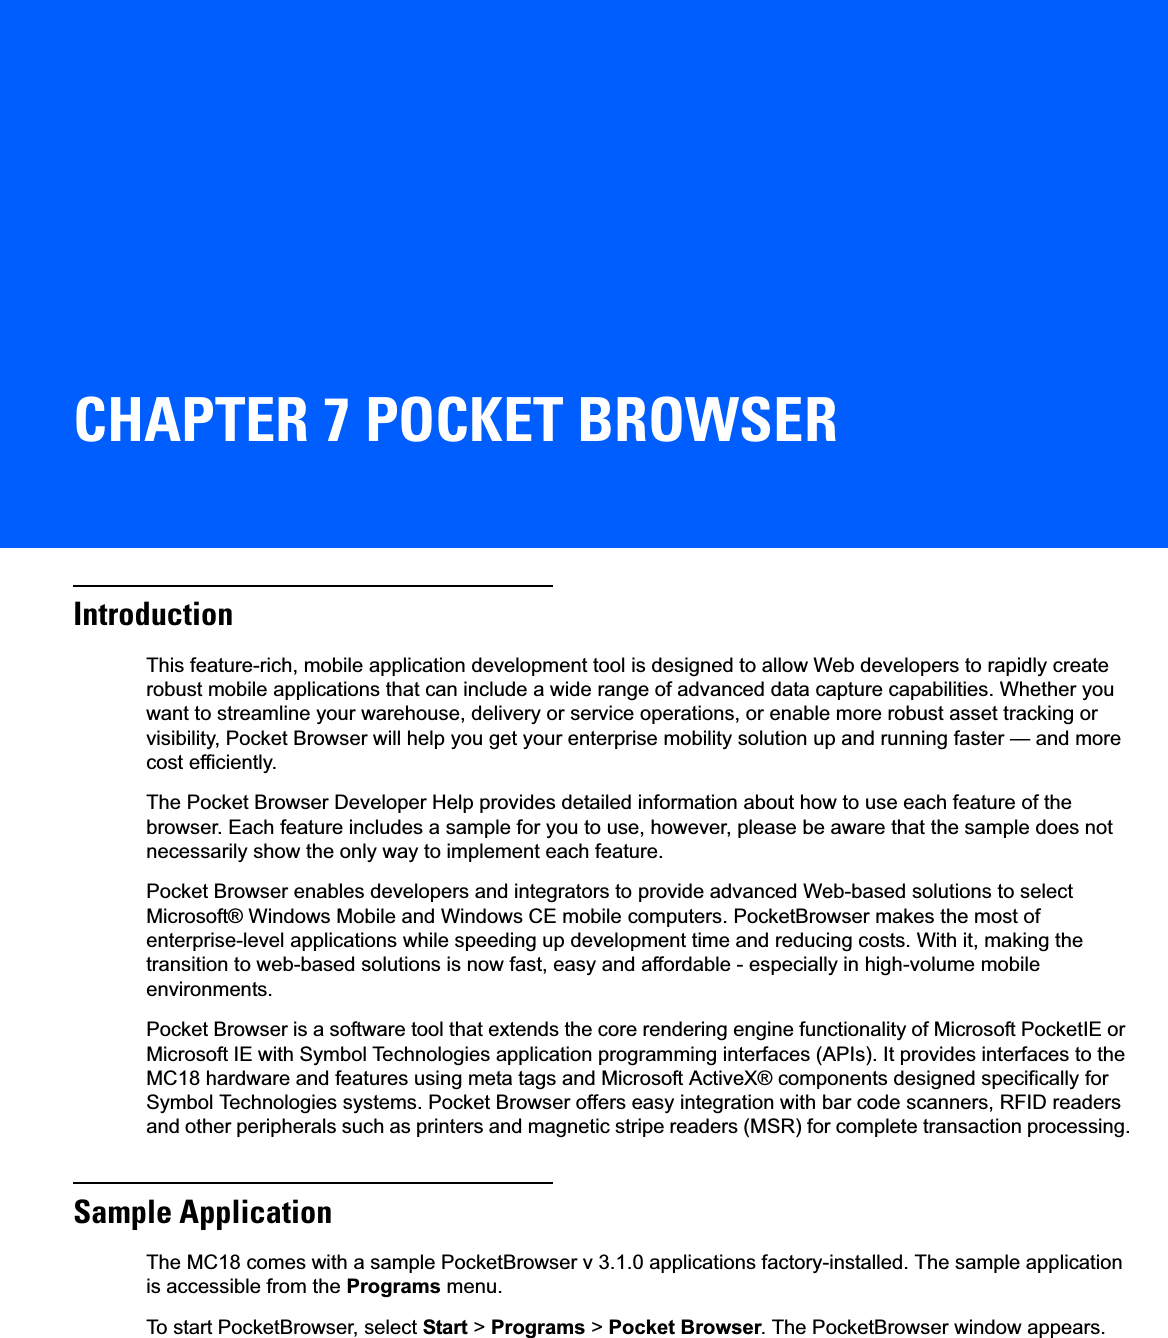 CHAPTER 7 POCKET BROWSERIntroductionThis feature-rich, mobile application development tool is designed to allow Web developers to rapidly create robust mobile applications that can include a wide range of advanced data capture capabilities. Whether you want to streamline your warehouse, delivery or service operations, or enable more robust asset tracking or visibility, Pocket Browser will help you get your enterprise mobility solution up and running faster — and more cost efficiently.The Pocket Browser Developer Help provides detailed information about how to use each feature of the browser. Each feature includes a sample for you to use, however, please be aware that the sample does not necessarily show the only way to implement each feature.Pocket Browser enables developers and integrators to provide advanced Web-based solutions to select Microsoft® Windows Mobile and Windows CE mobile computers. PocketBrowser makes the most of enterprise-level applications while speeding up development time and reducing costs. With it, making the transition to web-based solutions is now fast, easy and affordable - especially in high-volume mobile environments.Pocket Browser is a software tool that extends the core rendering engine functionality of Microsoft PocketIE or Microsoft IE with Symbol Technologies application programming interfaces (APIs). It provides interfaces to the MC18 hardware and features using meta tags and Microsoft ActiveX® components designed specifically for Symbol Technologies systems. Pocket Browser offers easy integration with bar code scanners, RFID readers and other peripherals such as printers and magnetic stripe readers (MSR) for complete transaction processing.Sample ApplicationThe MC18 comes with a sample PocketBrowser v 3.1.0 applications factory-installed. The sample application is accessible from the Programs menu.To start PocketBrowser, select Start &gt; Programs &gt; Pocket Browser. The PocketBrowser window appears.